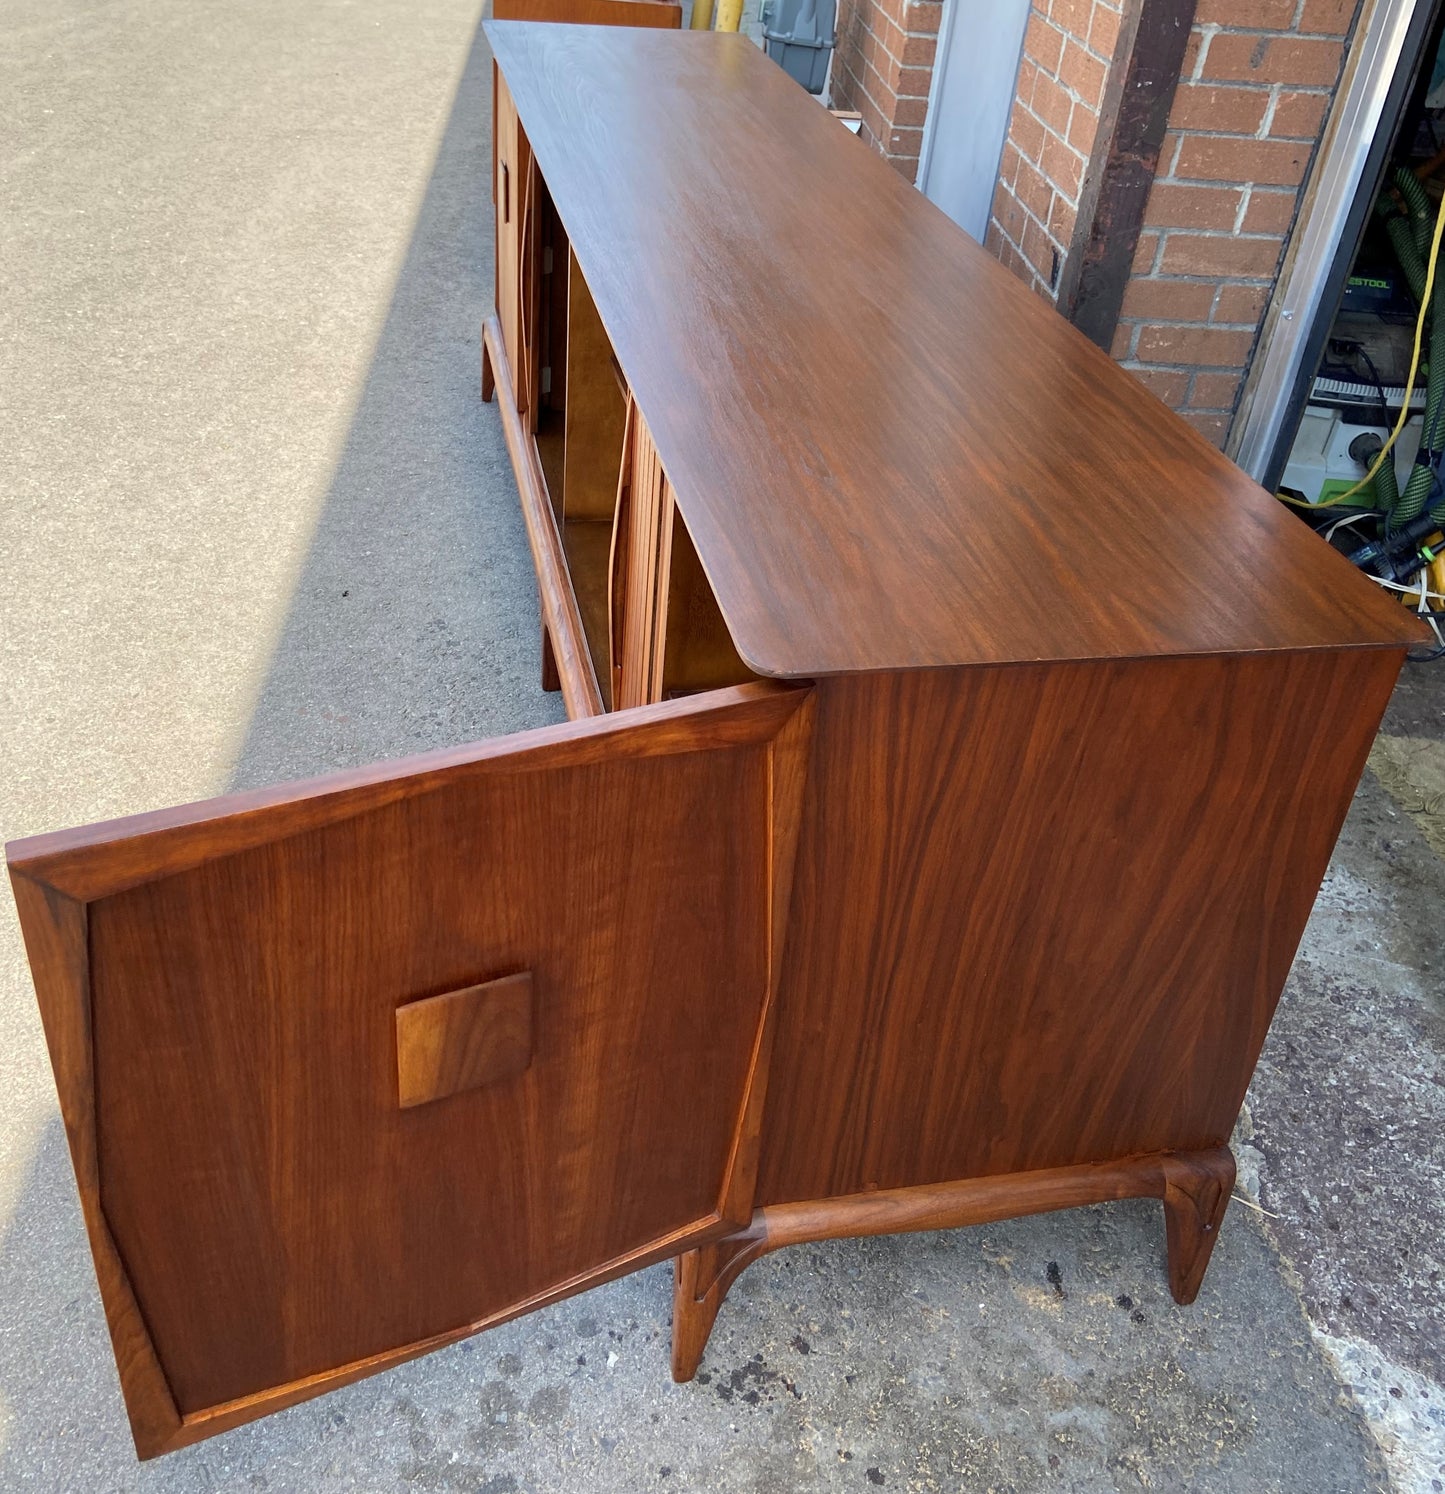 REFINISHED Mid Century Modern Walnut Credenza with Tambour doors, 8 ft